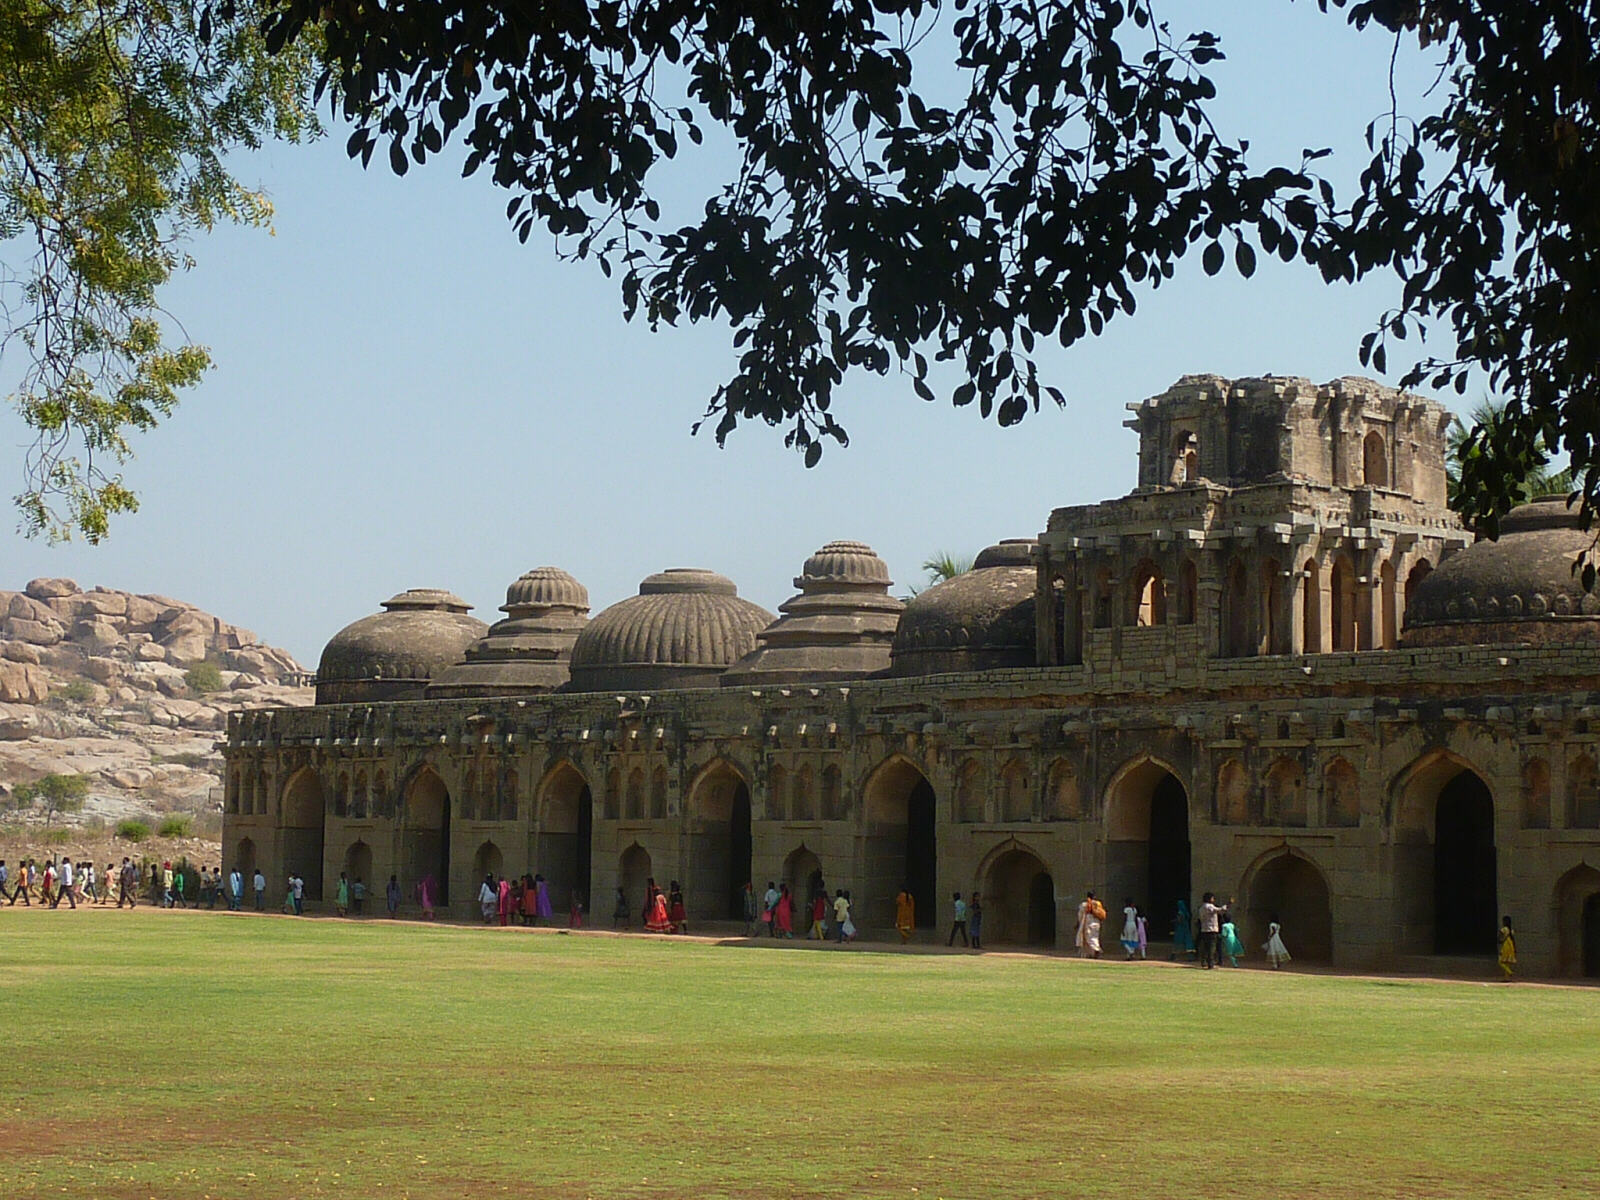 The elephant stables in the Royal Centre in Hampi, India